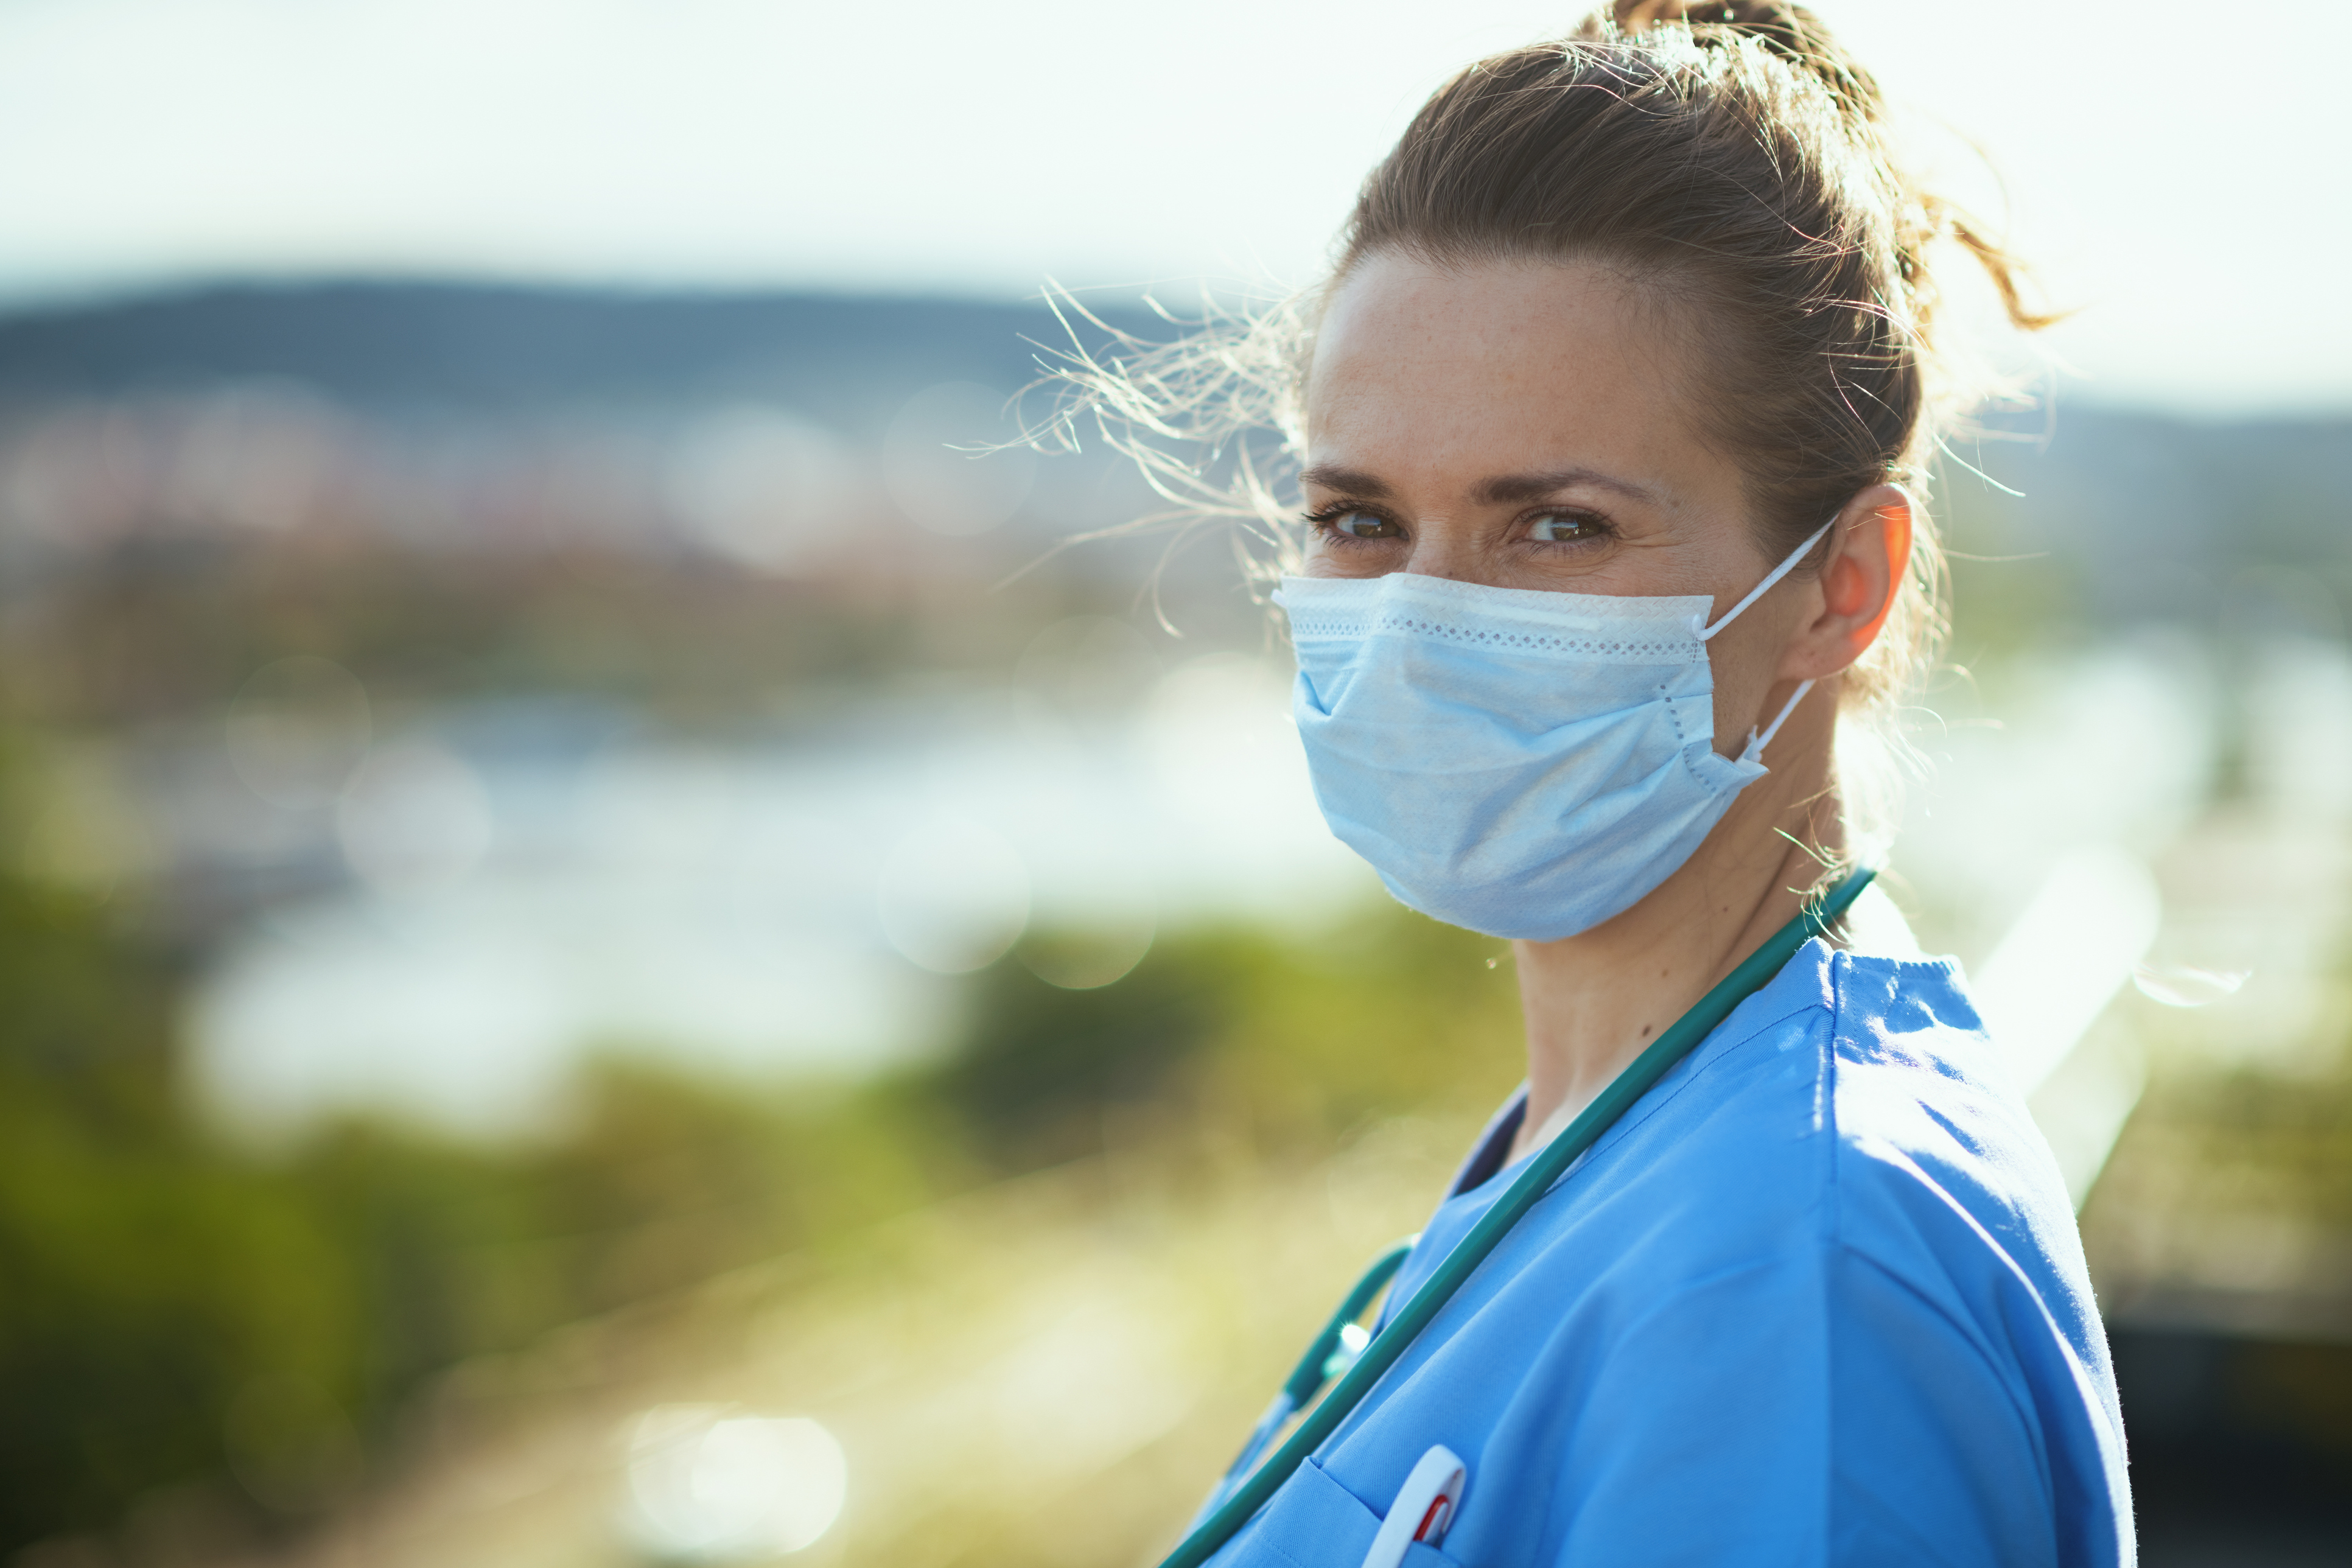 5 Tips for Nurses Working in Hot Weather